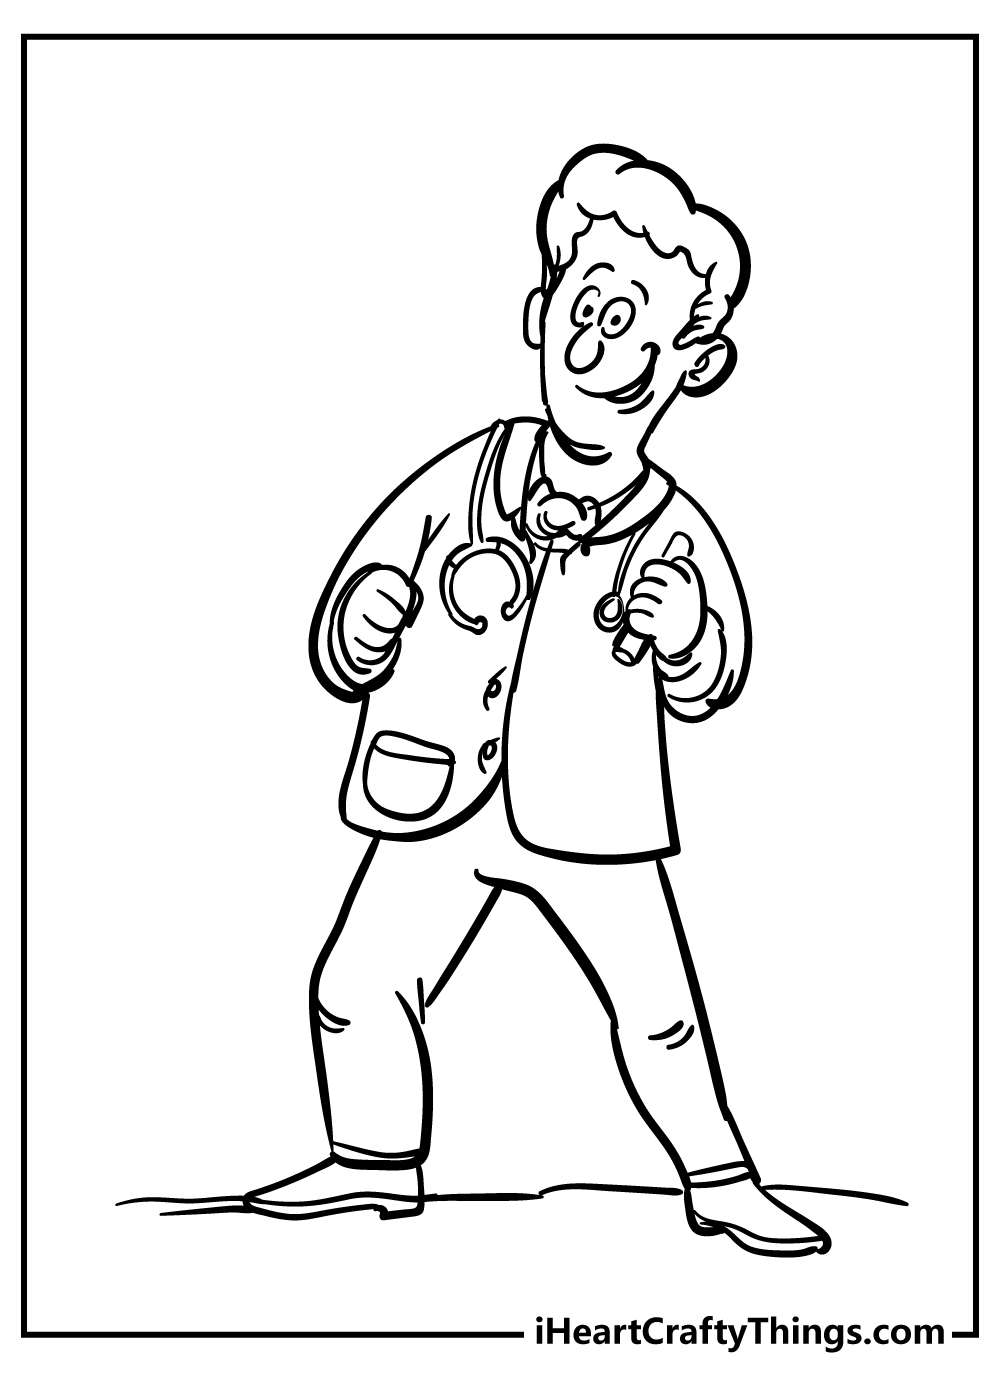 Doctor Coloring Pages for preschoolers free printable